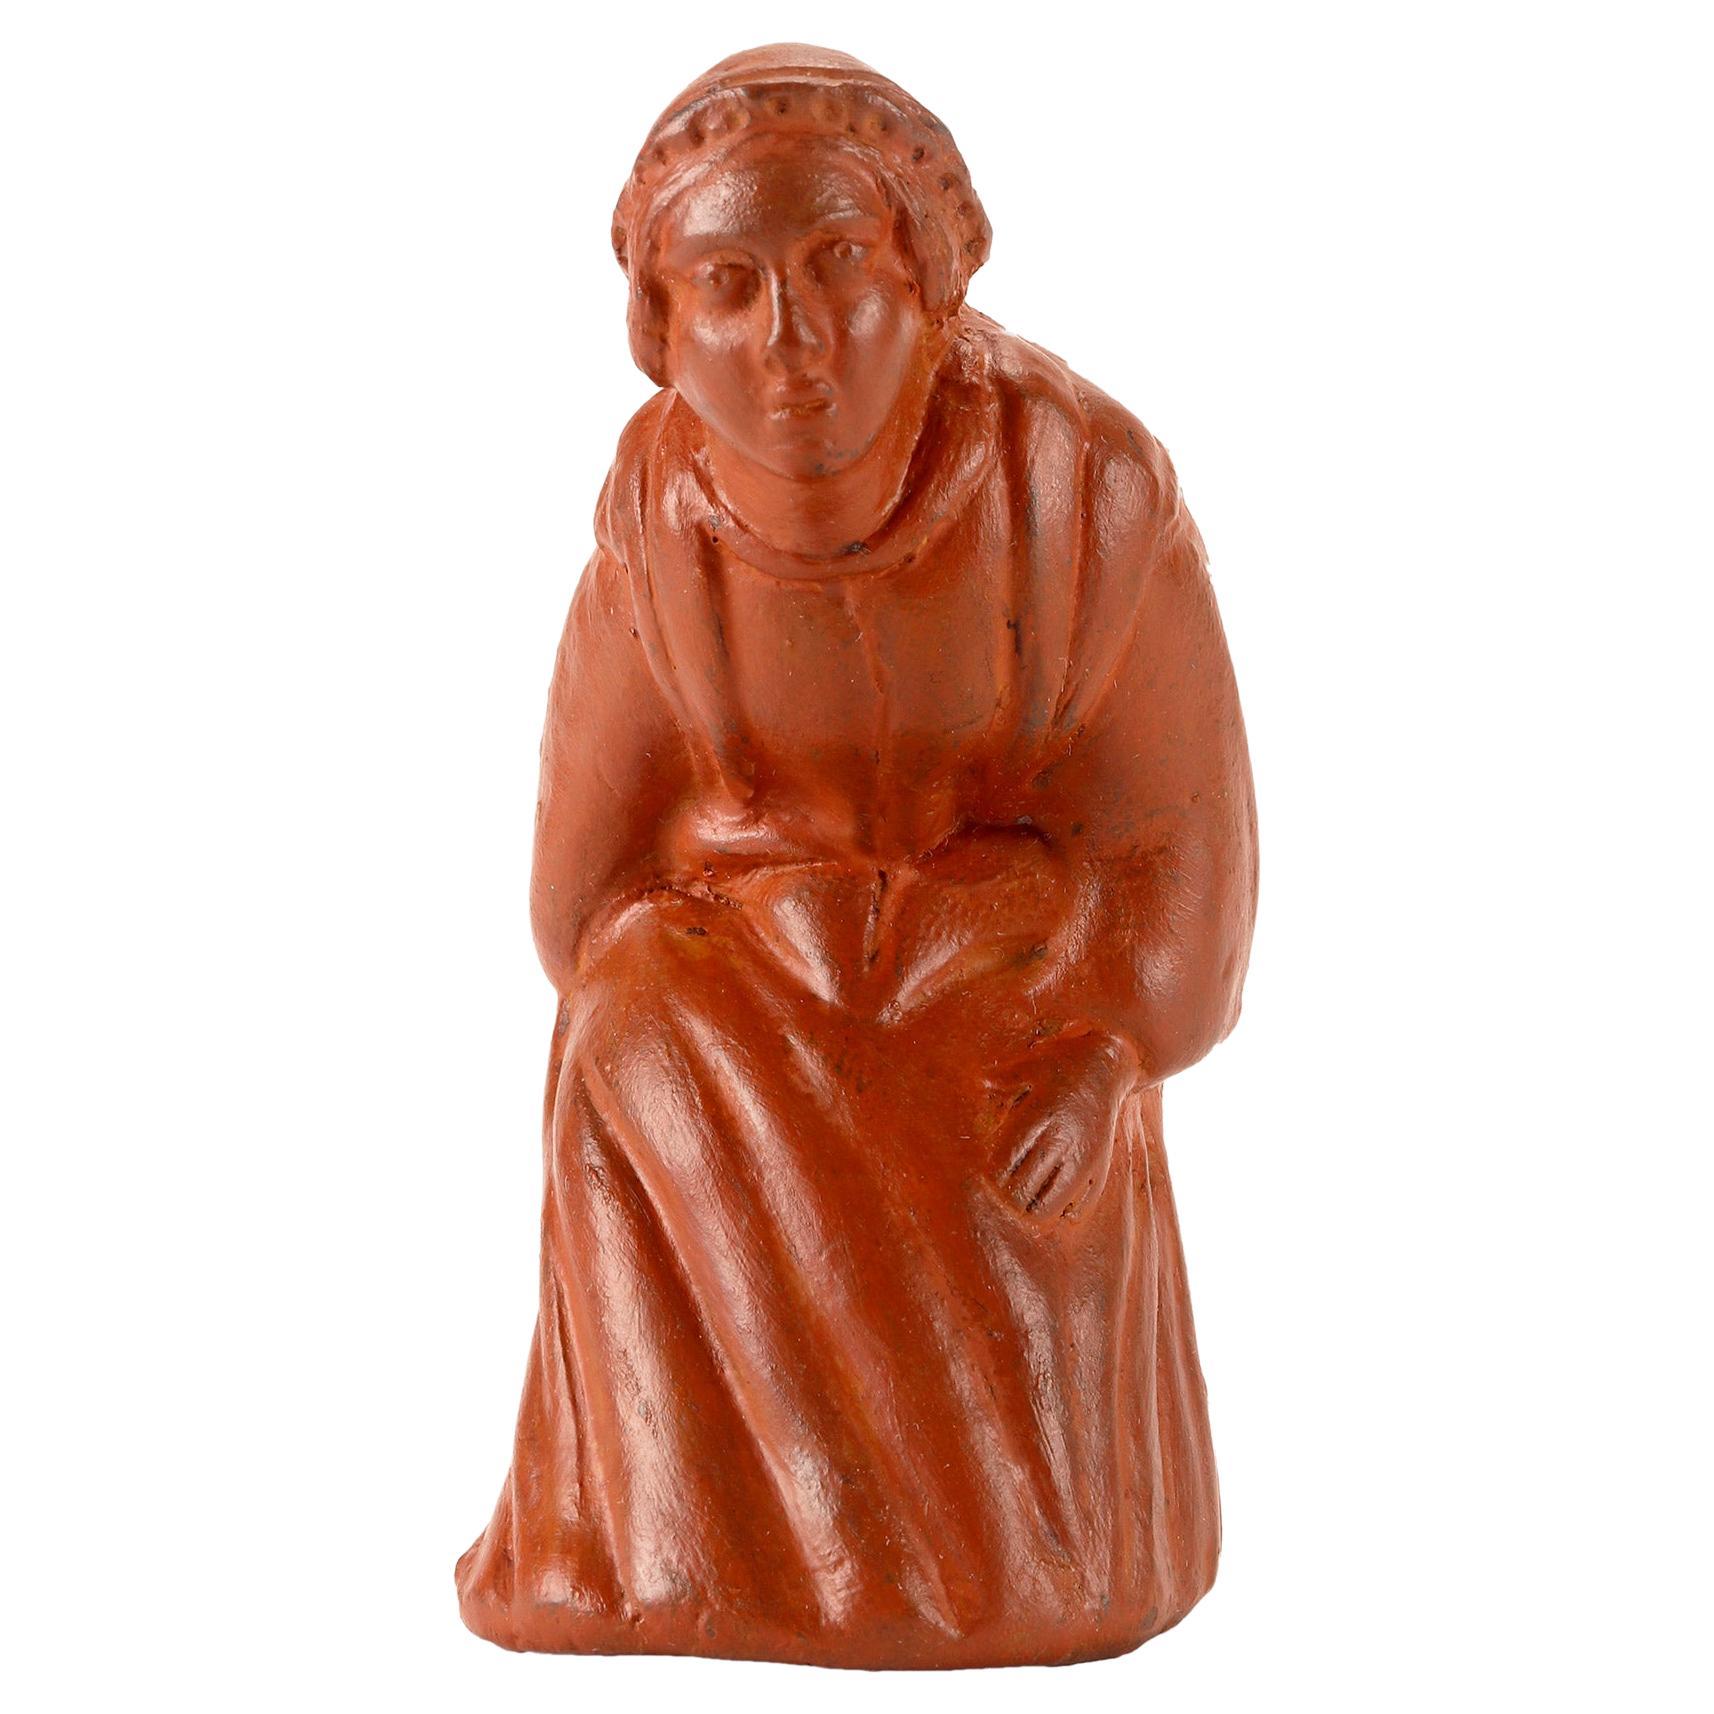 A terracotta snuff box in the form of a squatting woman. France, 1810.